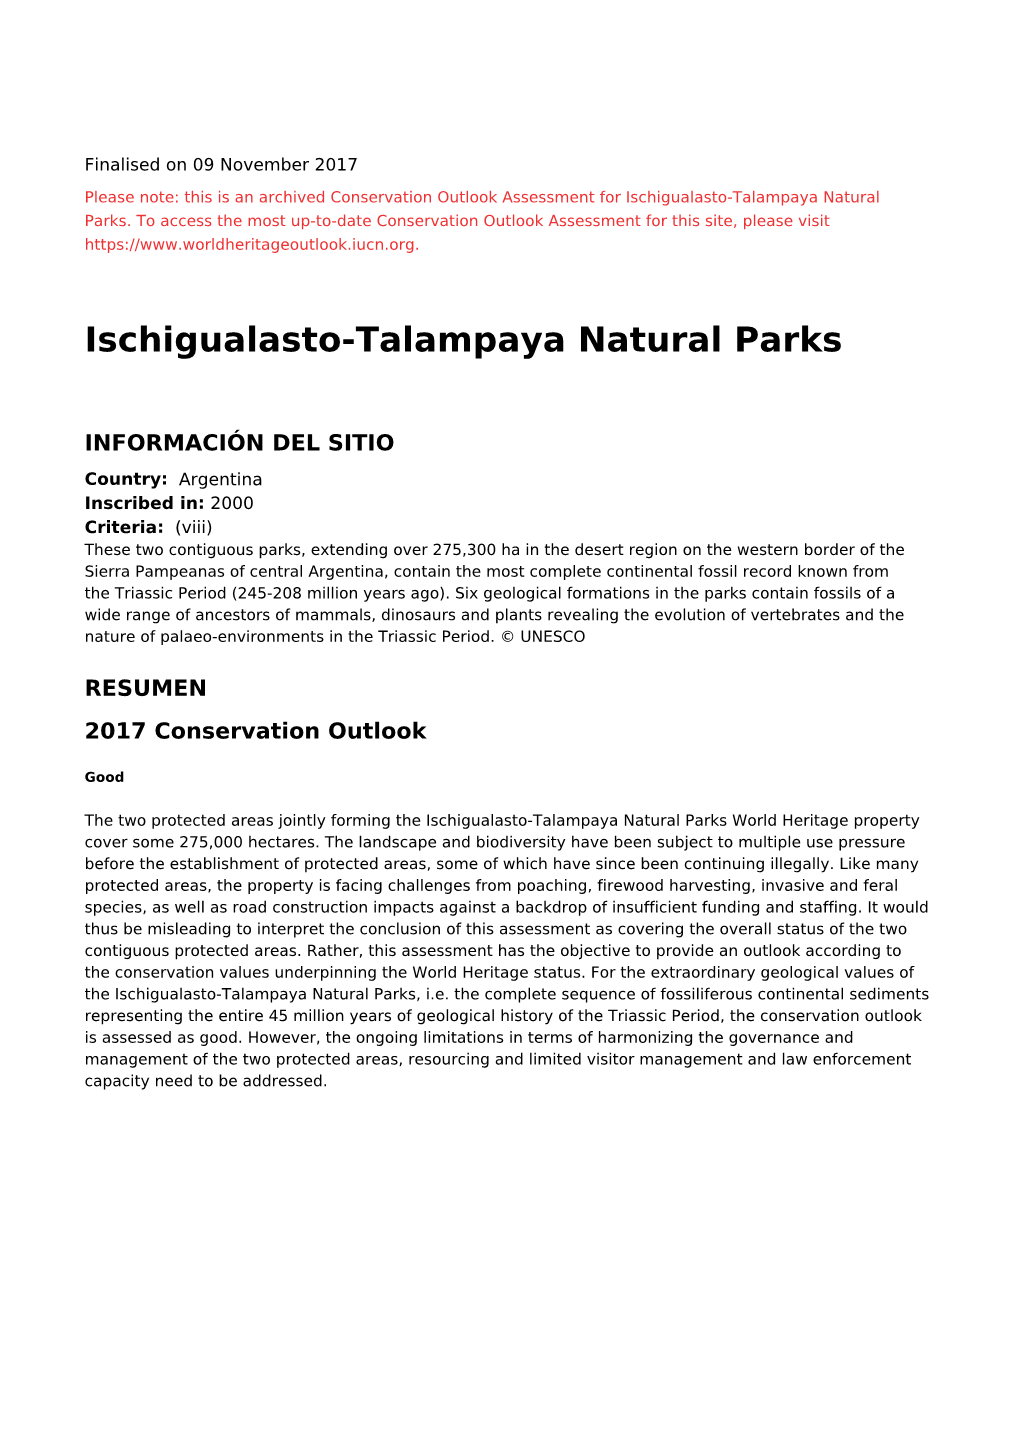 Ischigualasto-Talampaya Natural Parks - 2017 Conservation Outlook Assessment (Archived)